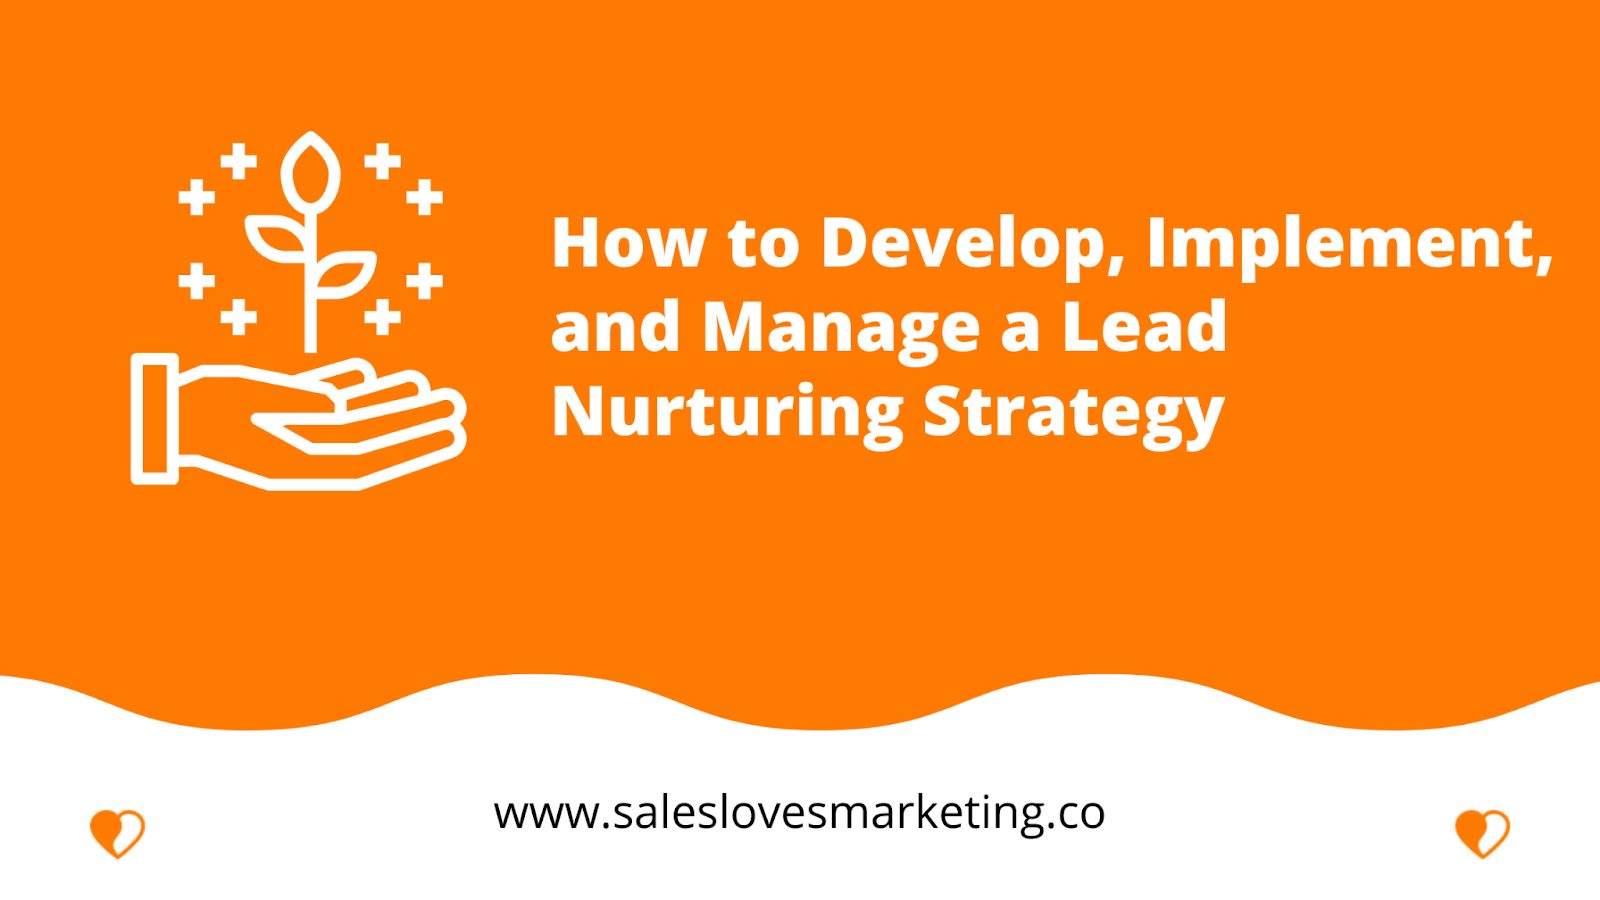 How to Develop Implement and Manage a Lead Nurturing Strategy